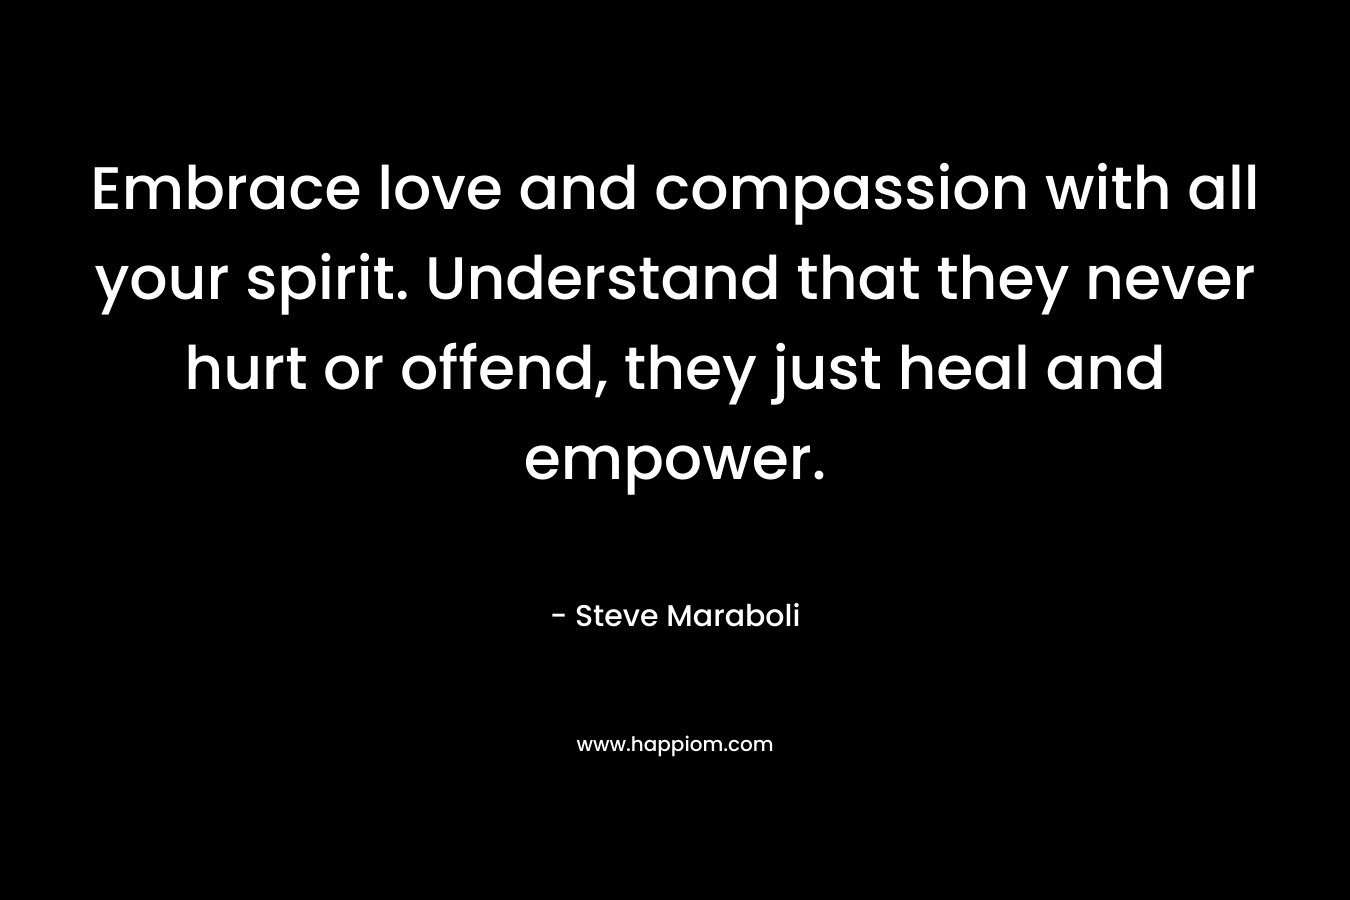 Embrace love and compassion with all your spirit. Understand that they never hurt or offend, they just heal and empower.